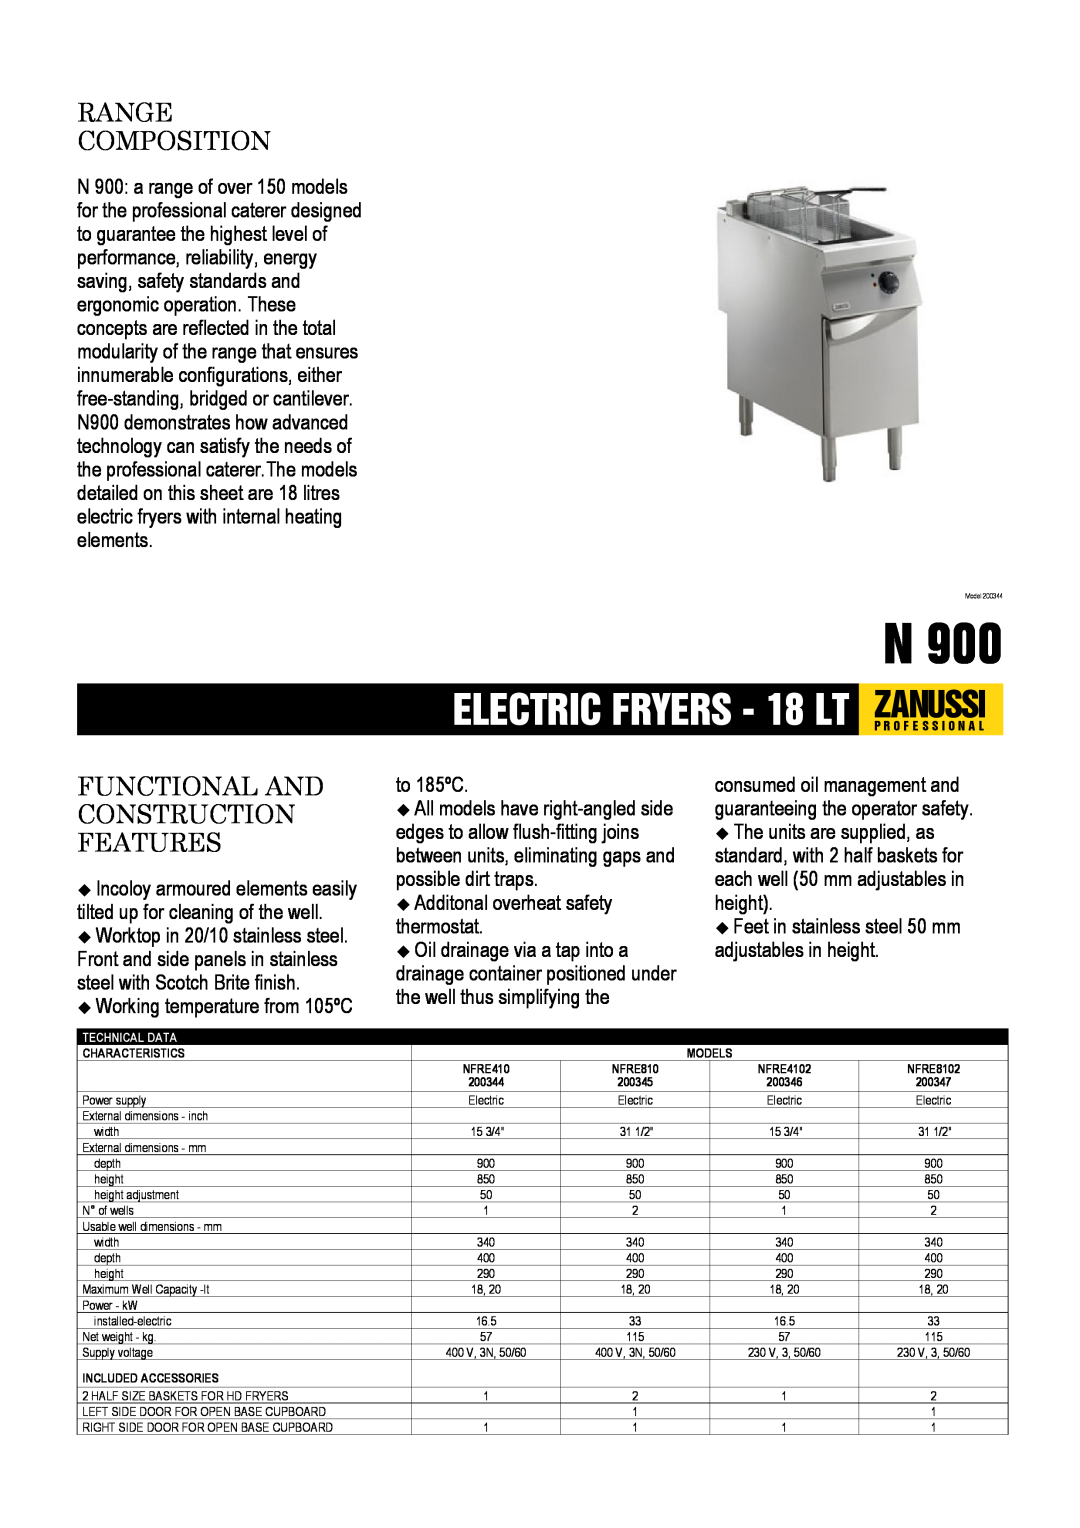 Electrolux NFRE8102, NFRE4102 dimensions ELECTRIC FRYERS - 18 LT ZANUSSIP R O F E S S I O N A L, Range Composition 